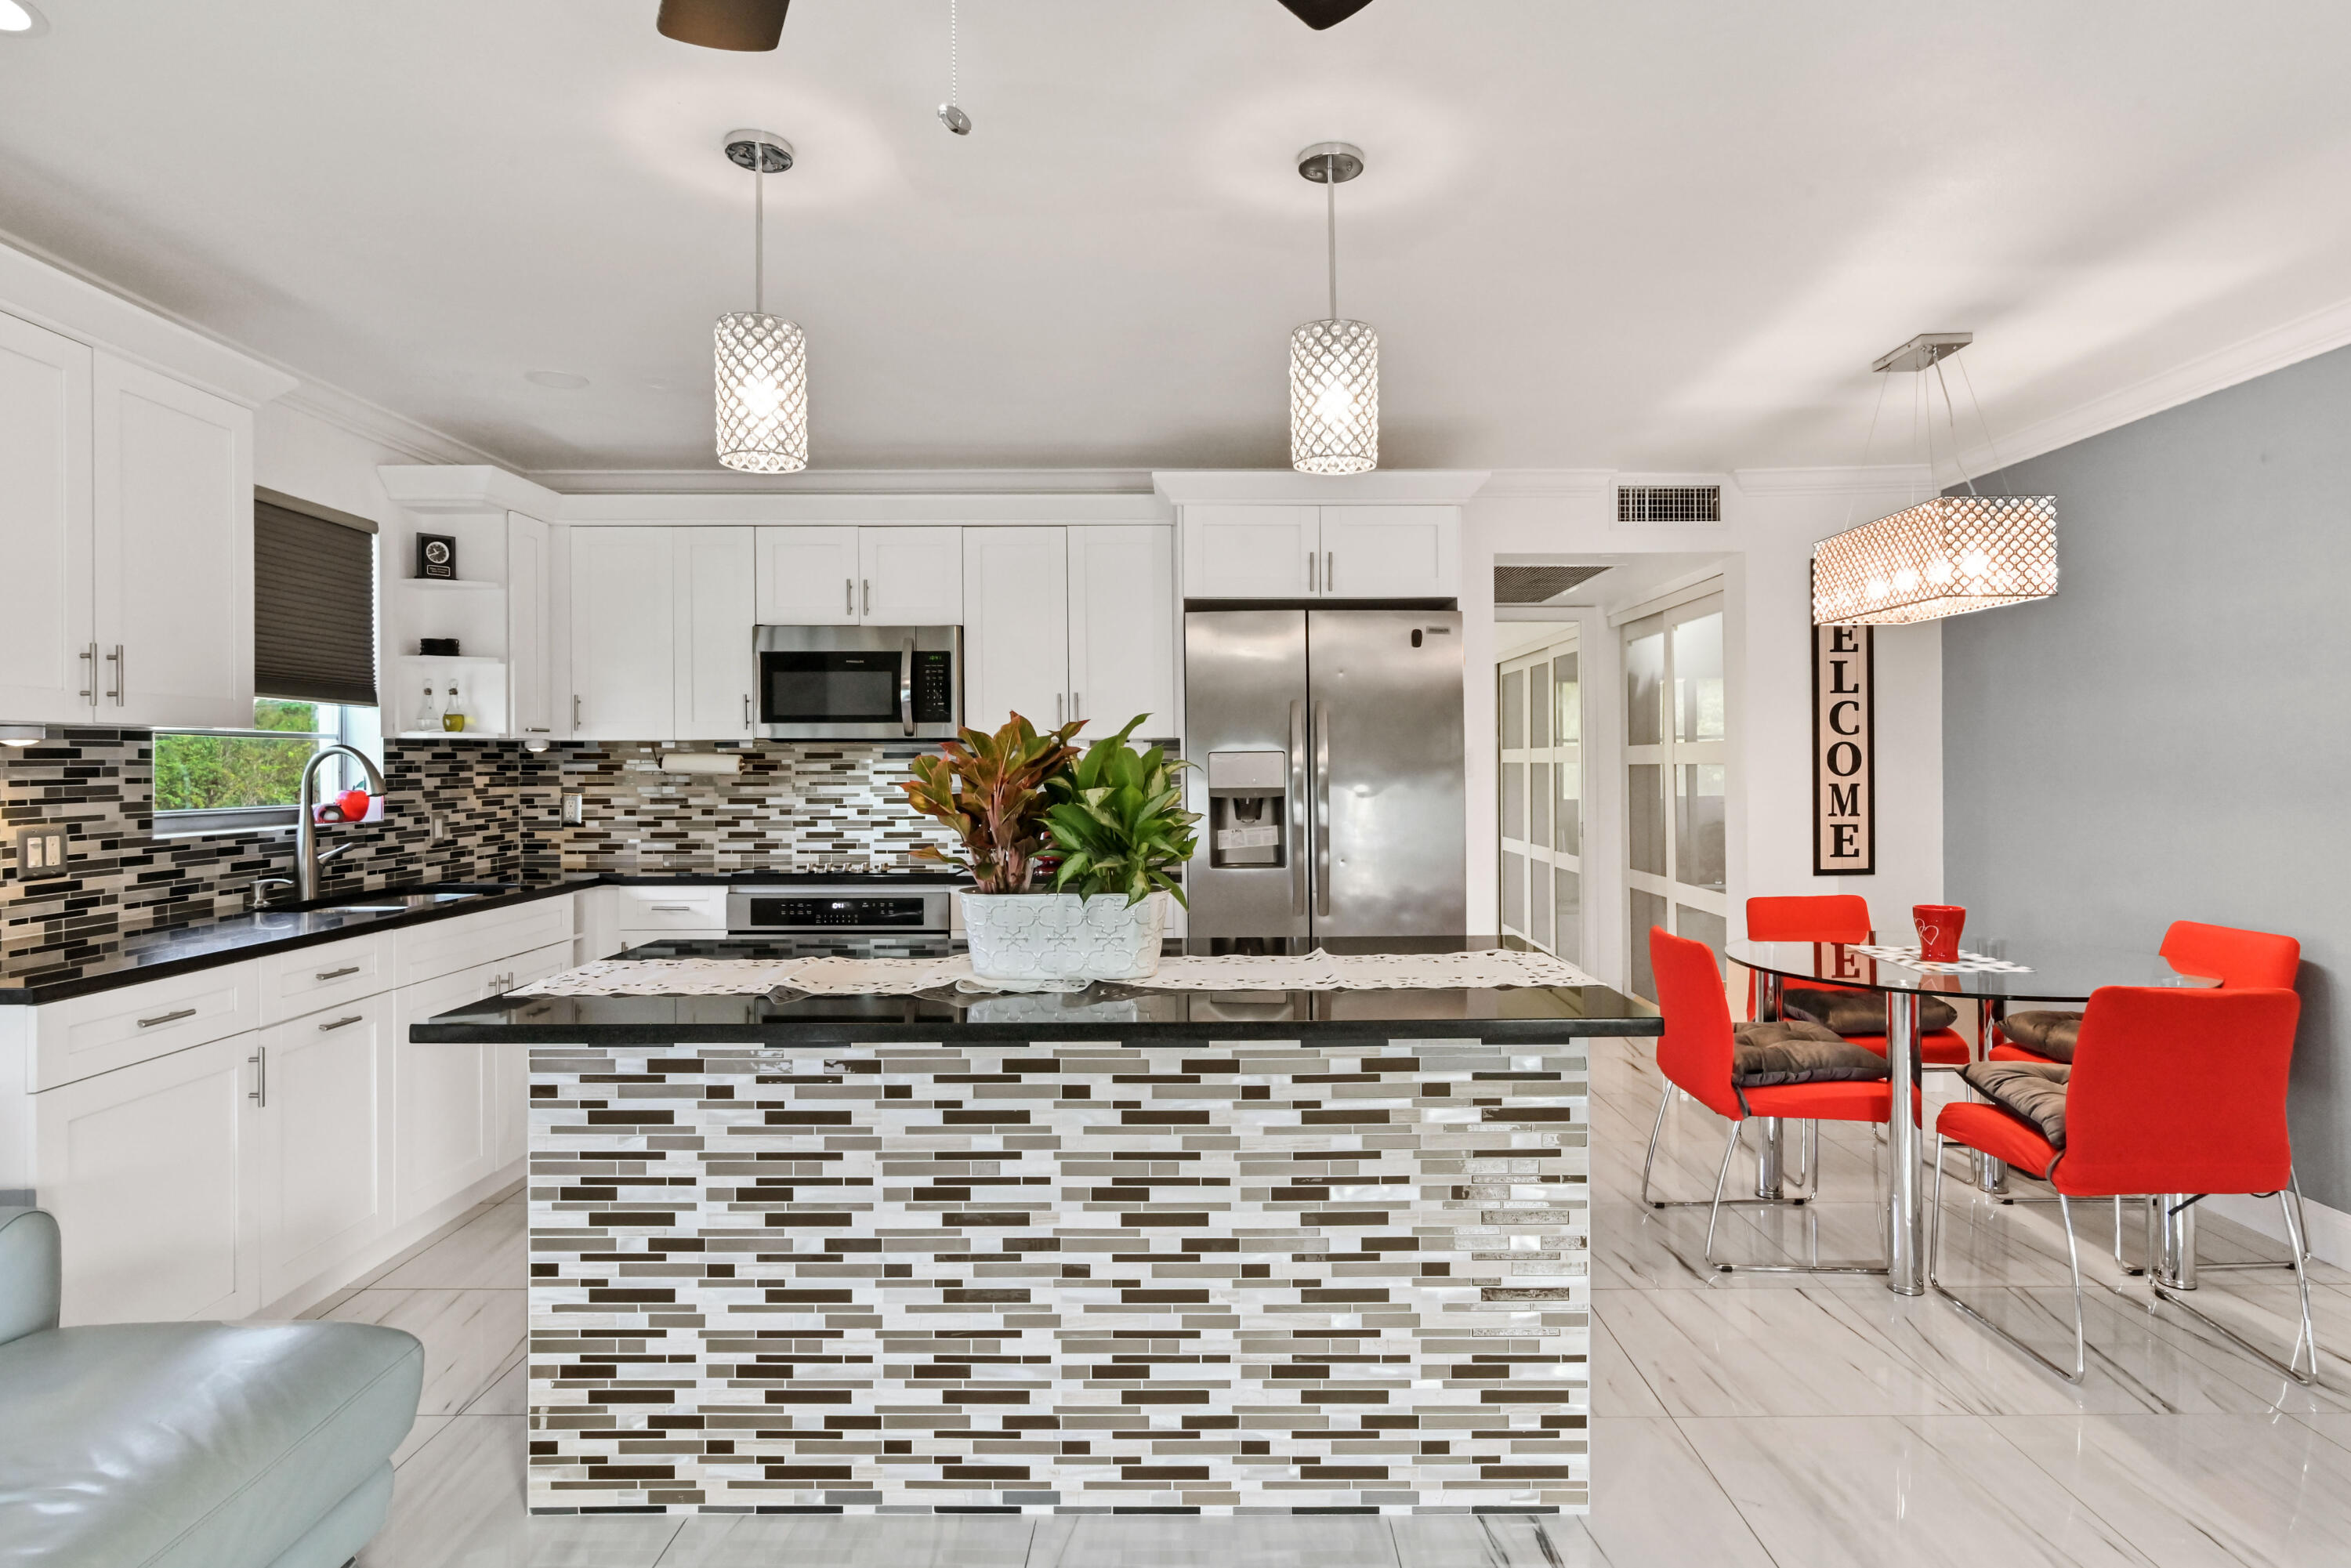 a kitchen with stainless steel appliances kitchen island granite countertop a sink and cabinets